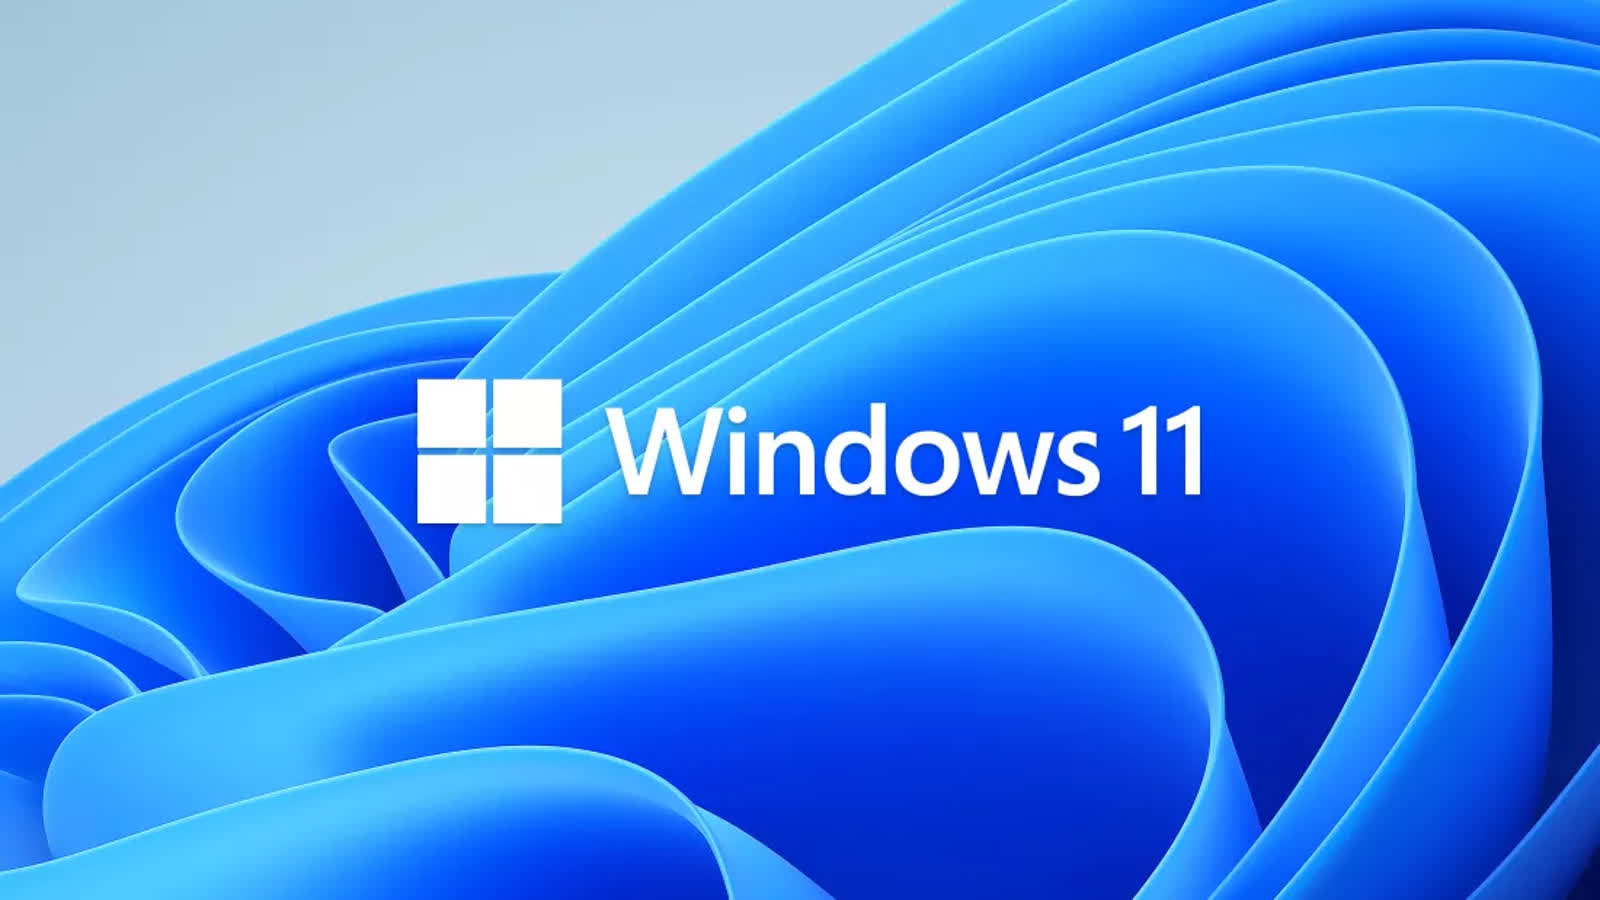 Windows 11 issues mounting, networking software may slow down internet speeds